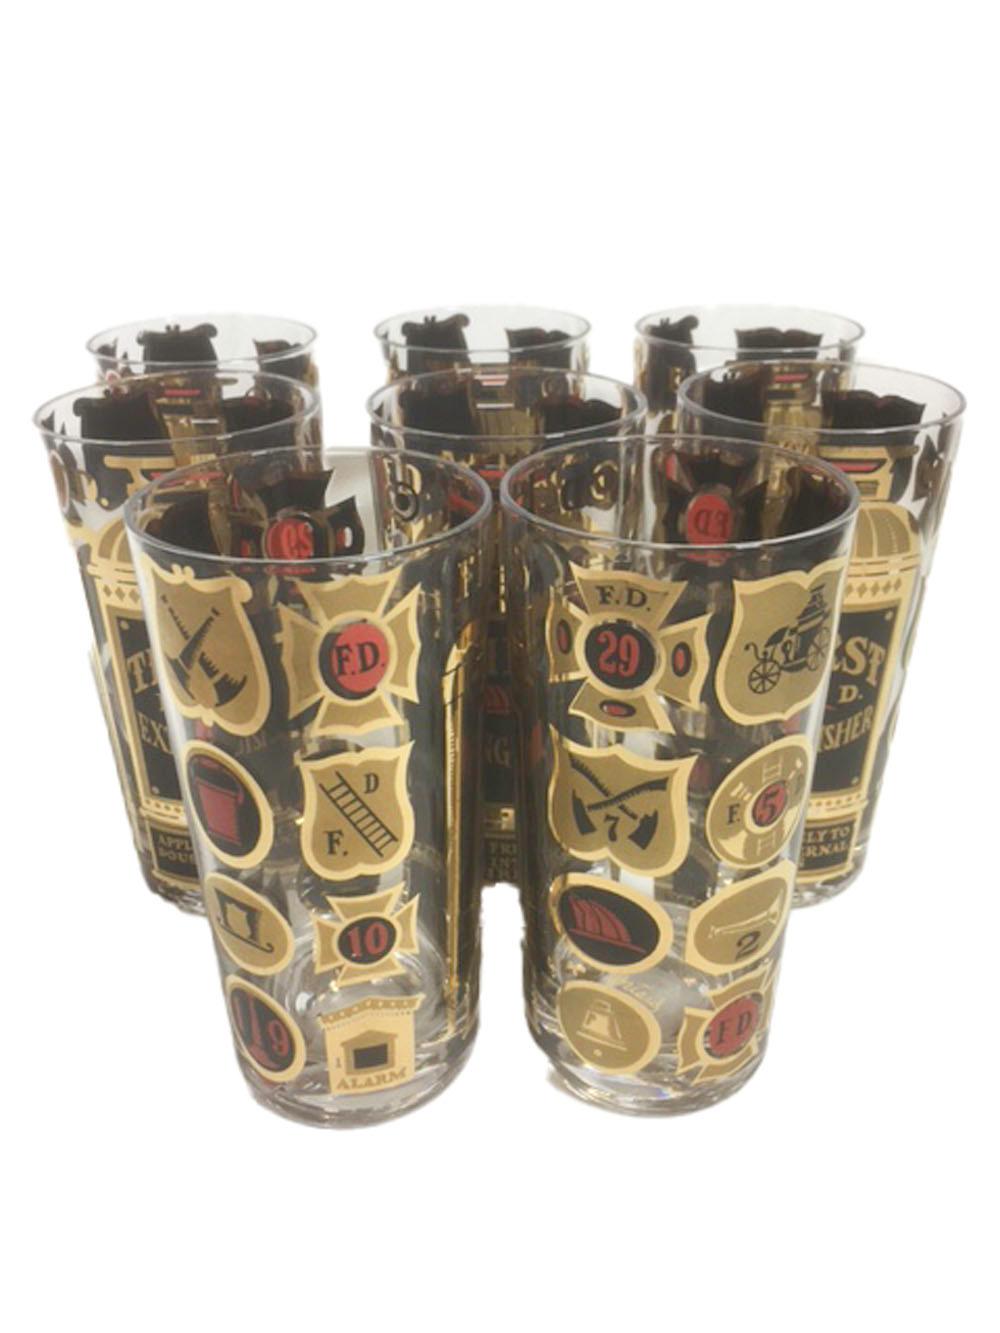 Designed by Georges Briard and decorated with 22k gold in gloss and satin finish combined with black and red enamel, The Thirst extinguisher pattern has a large central fire extinguisher with the front plaque saying 